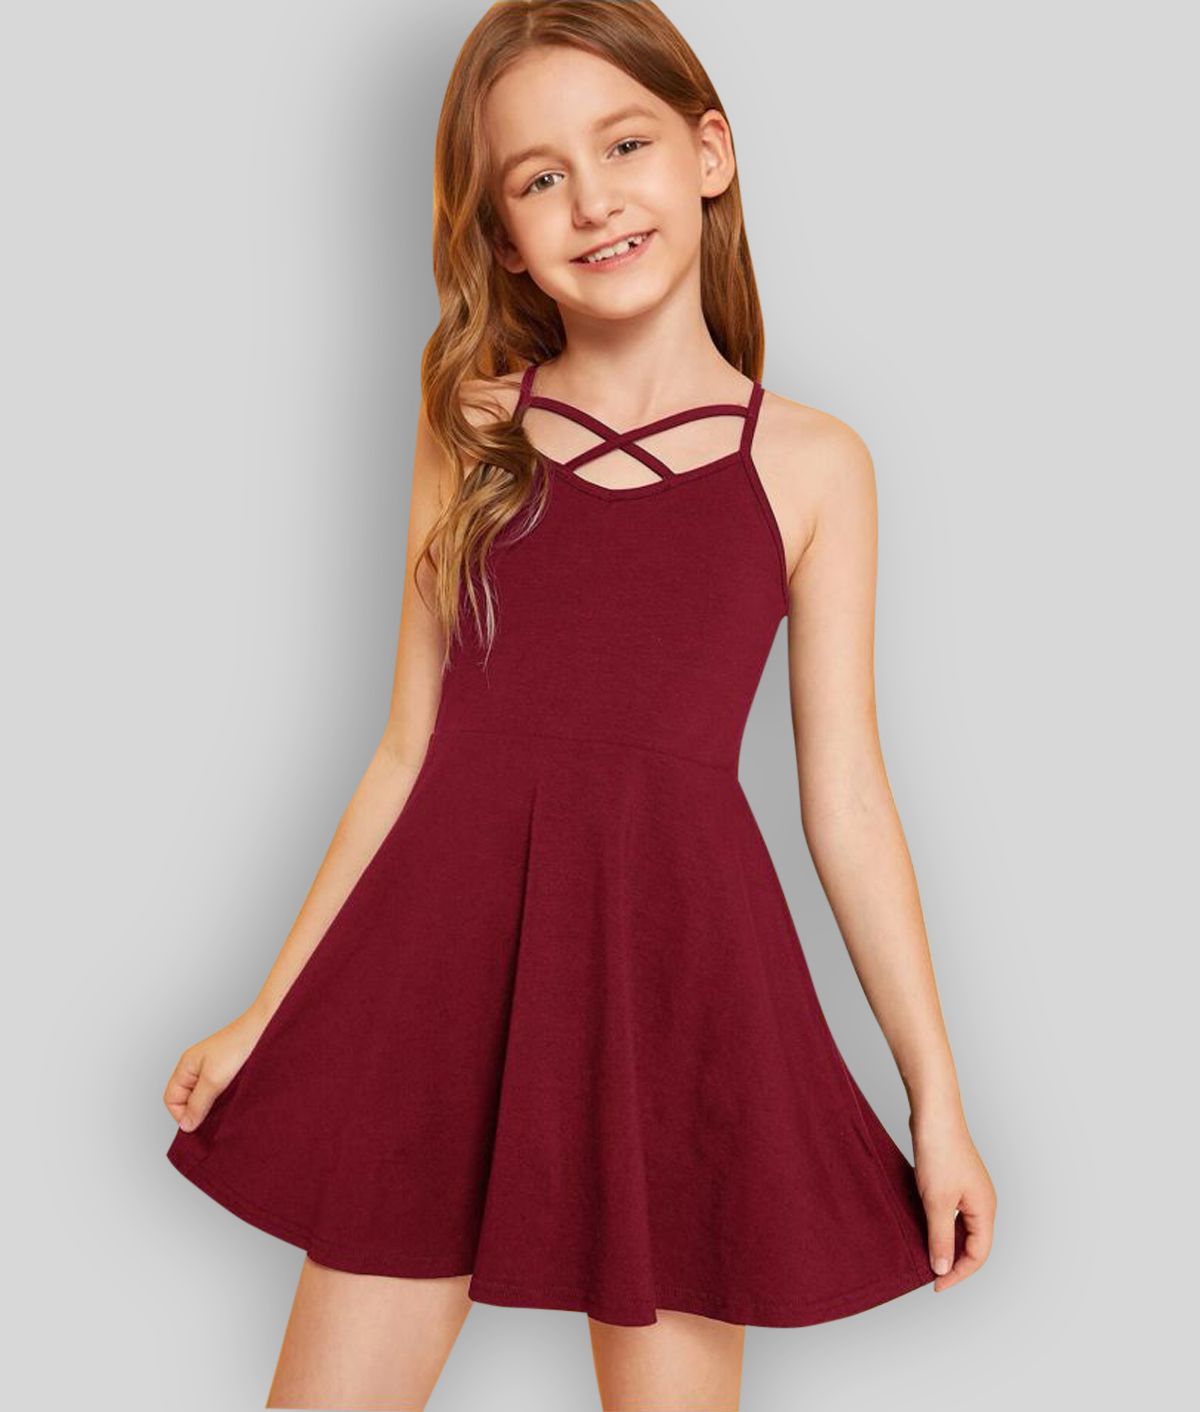     			Addyvero - Maroon Cotton Blend Girls A-line Dress ( Pack of 1 )